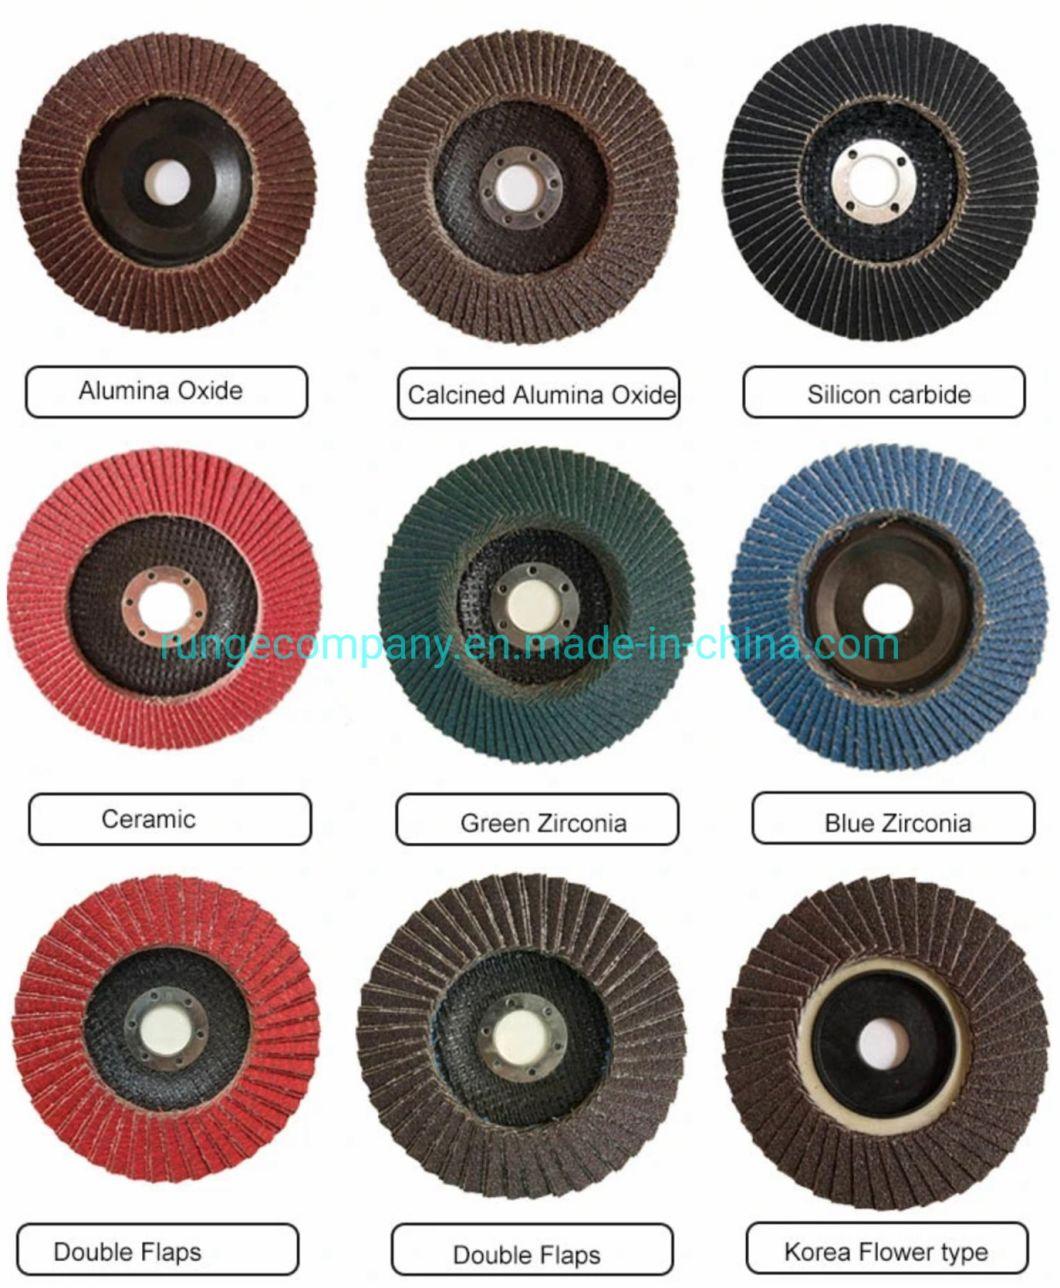 Power Electric Tools Accessories 14" X 1/8" Cutting Discs for Steel Structural Steel Rebar Iron Pipe